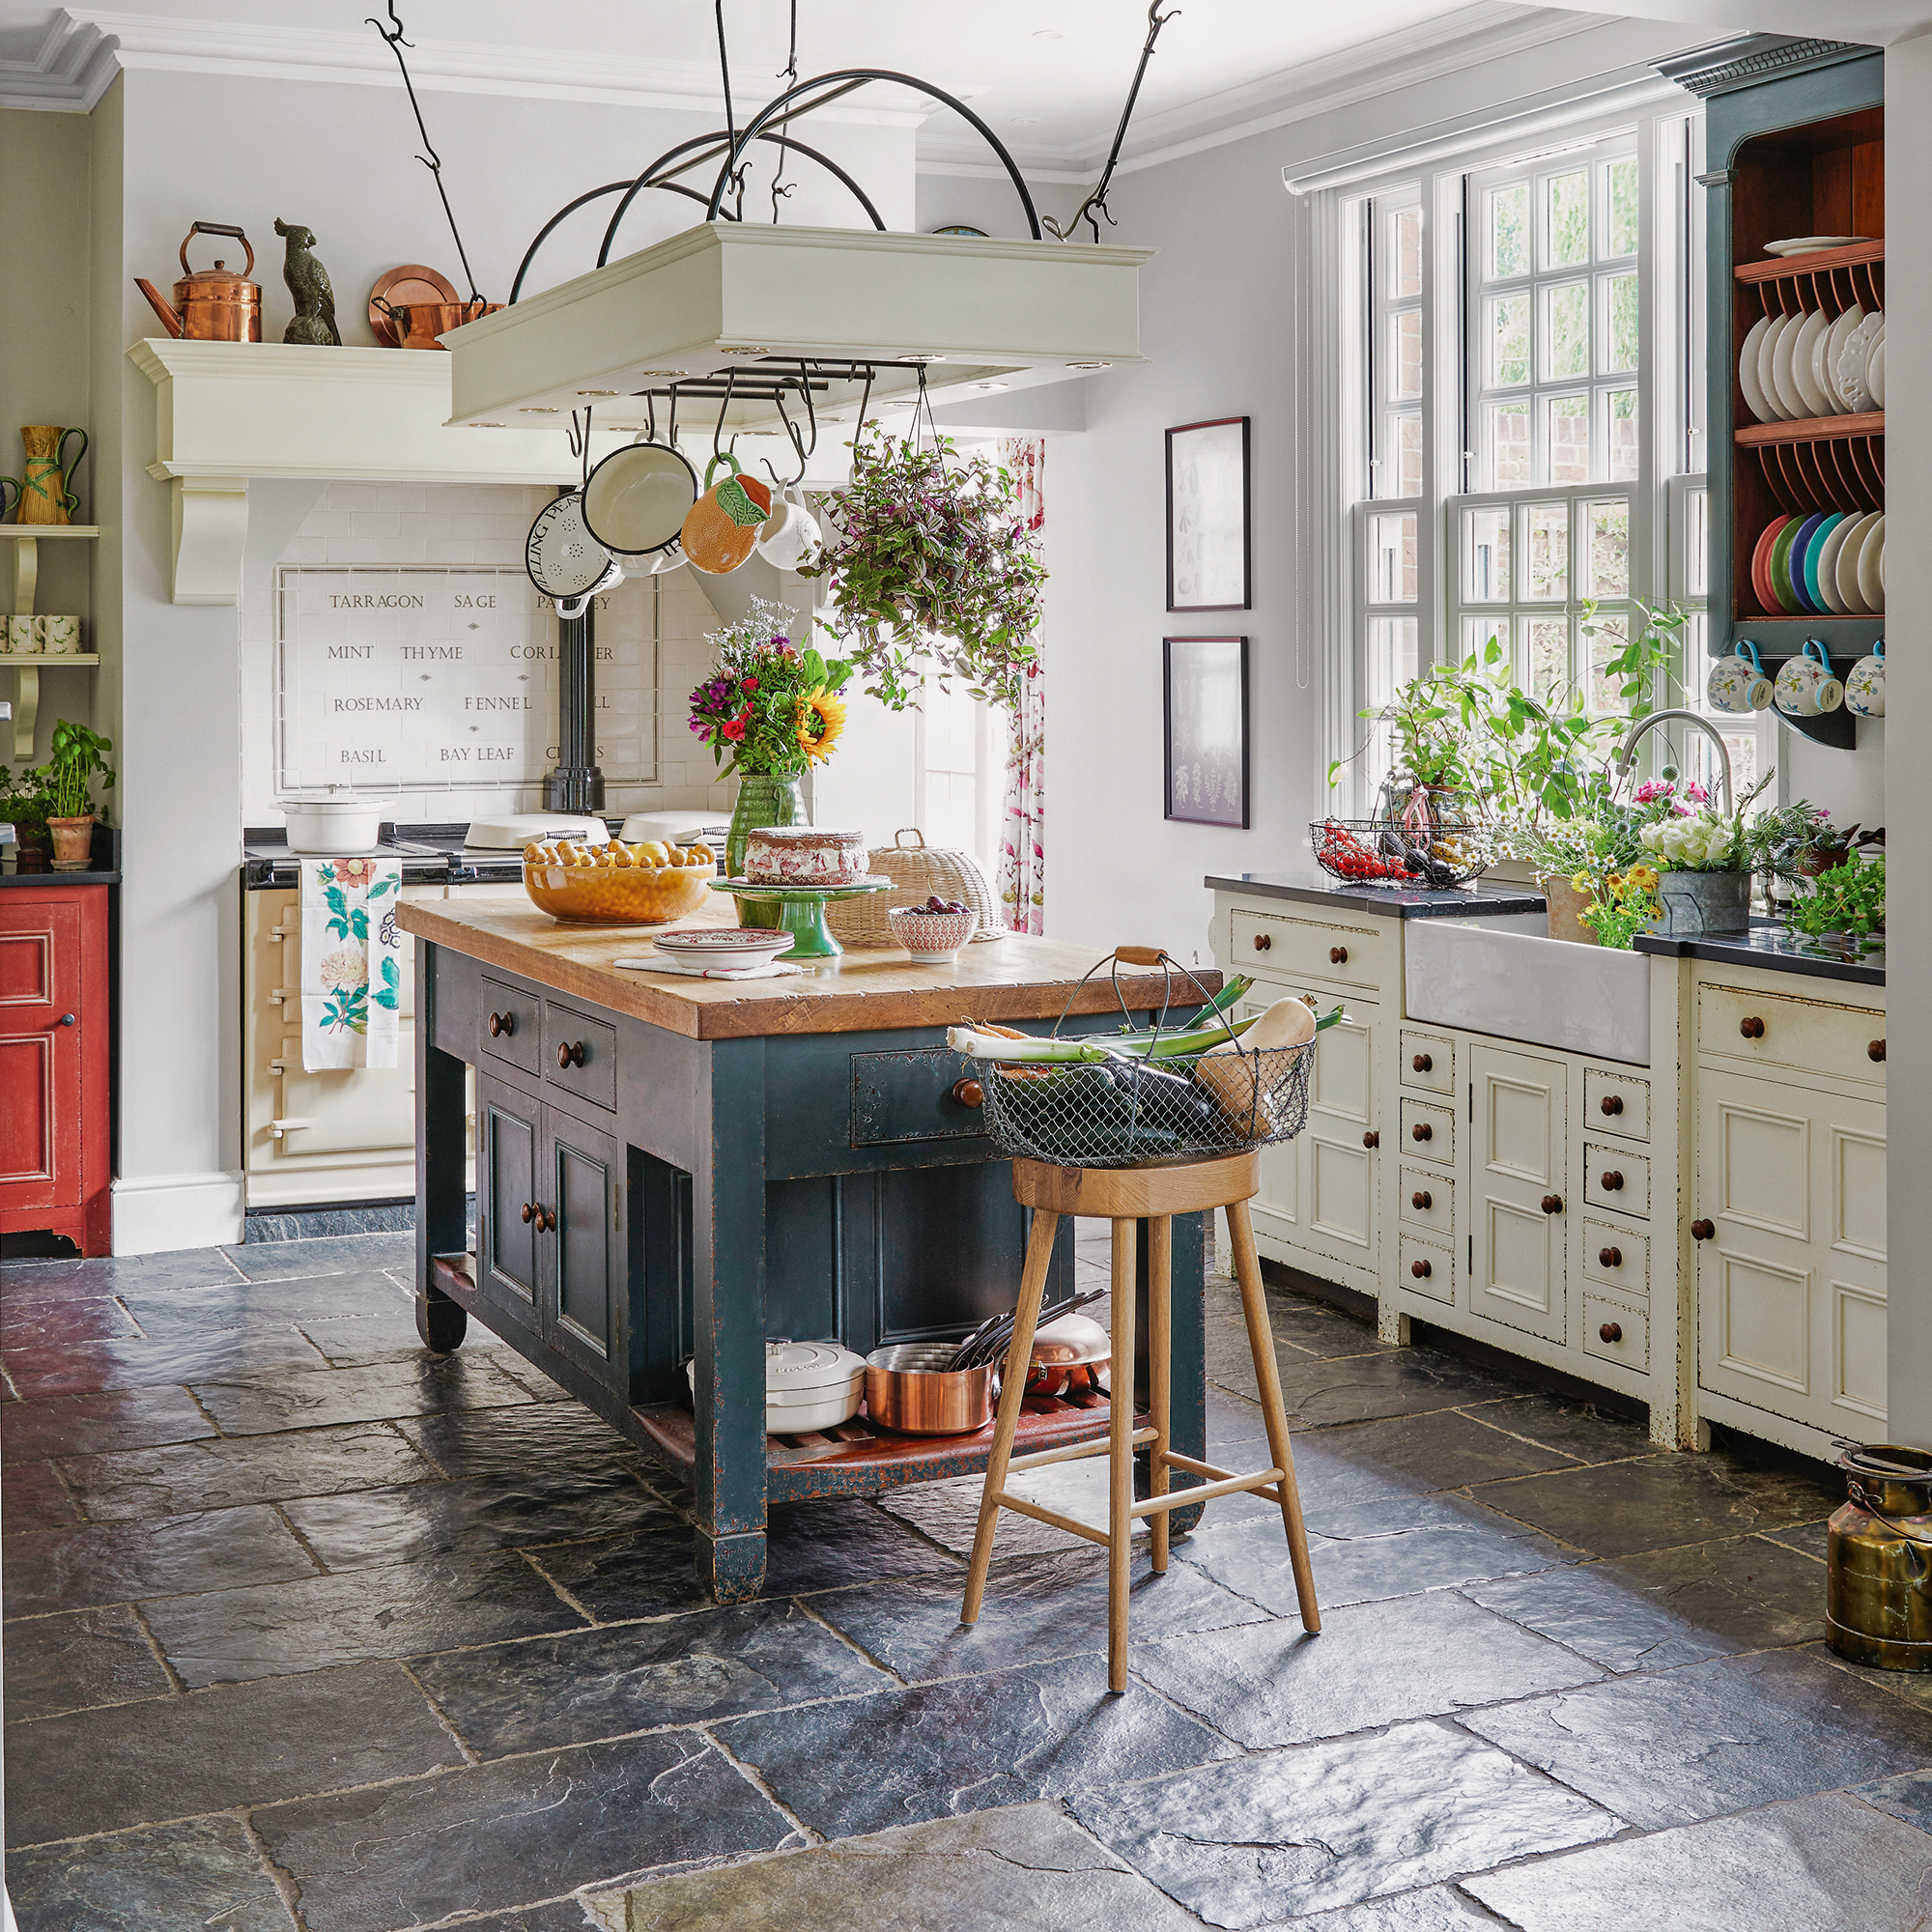 country kitchen with a freestanding island, stone floor tiles, cream units and range cooker